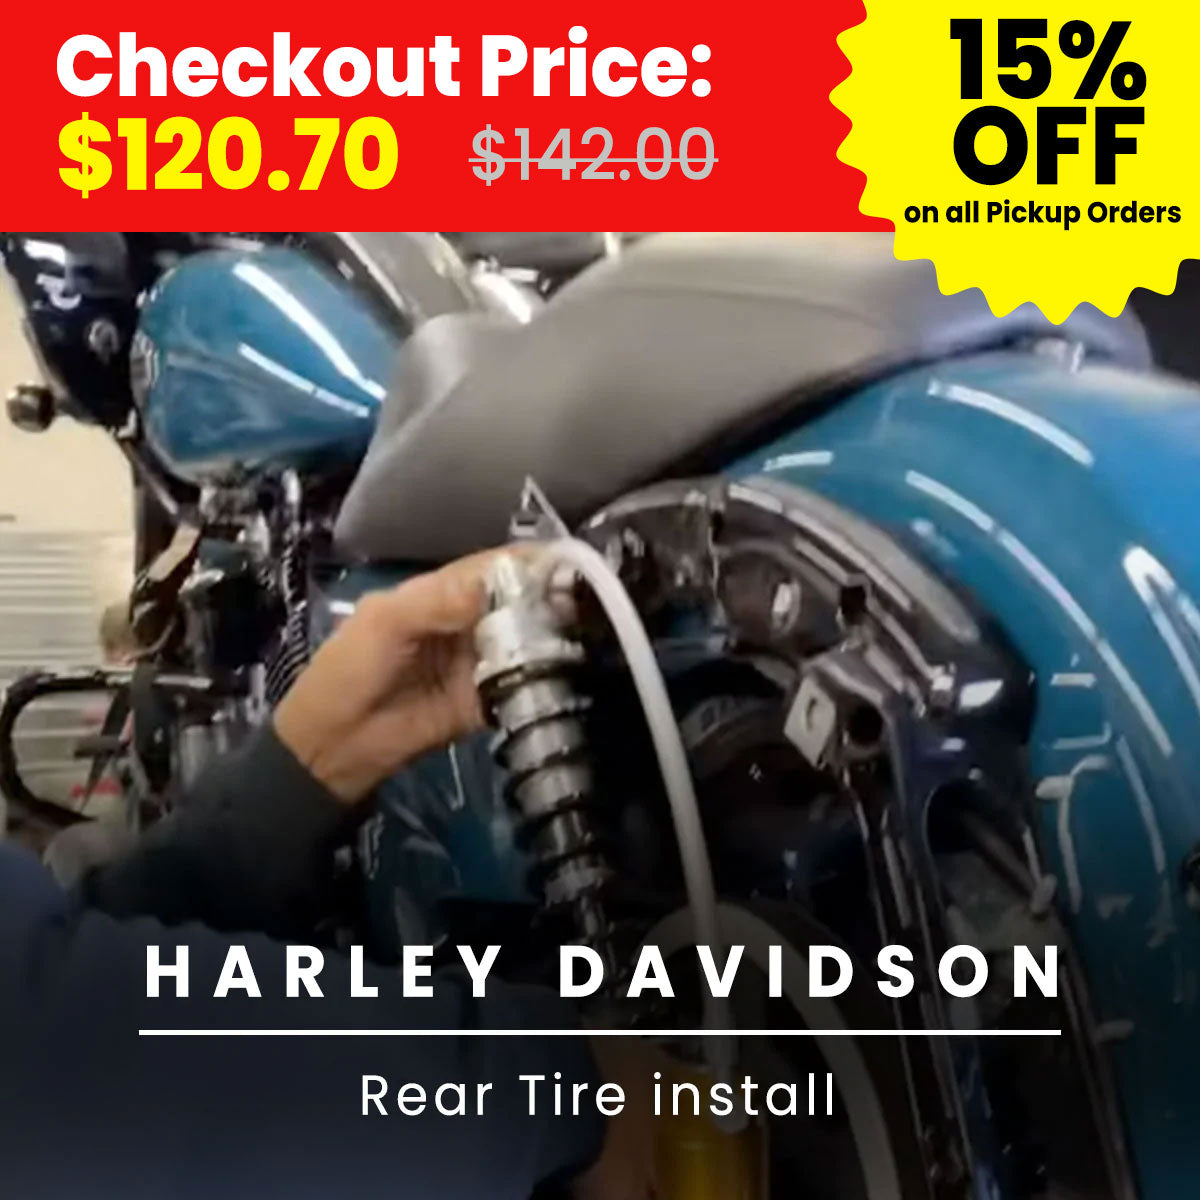 Harley Davidson Tire Install – Rear Tire install Only Service-Service